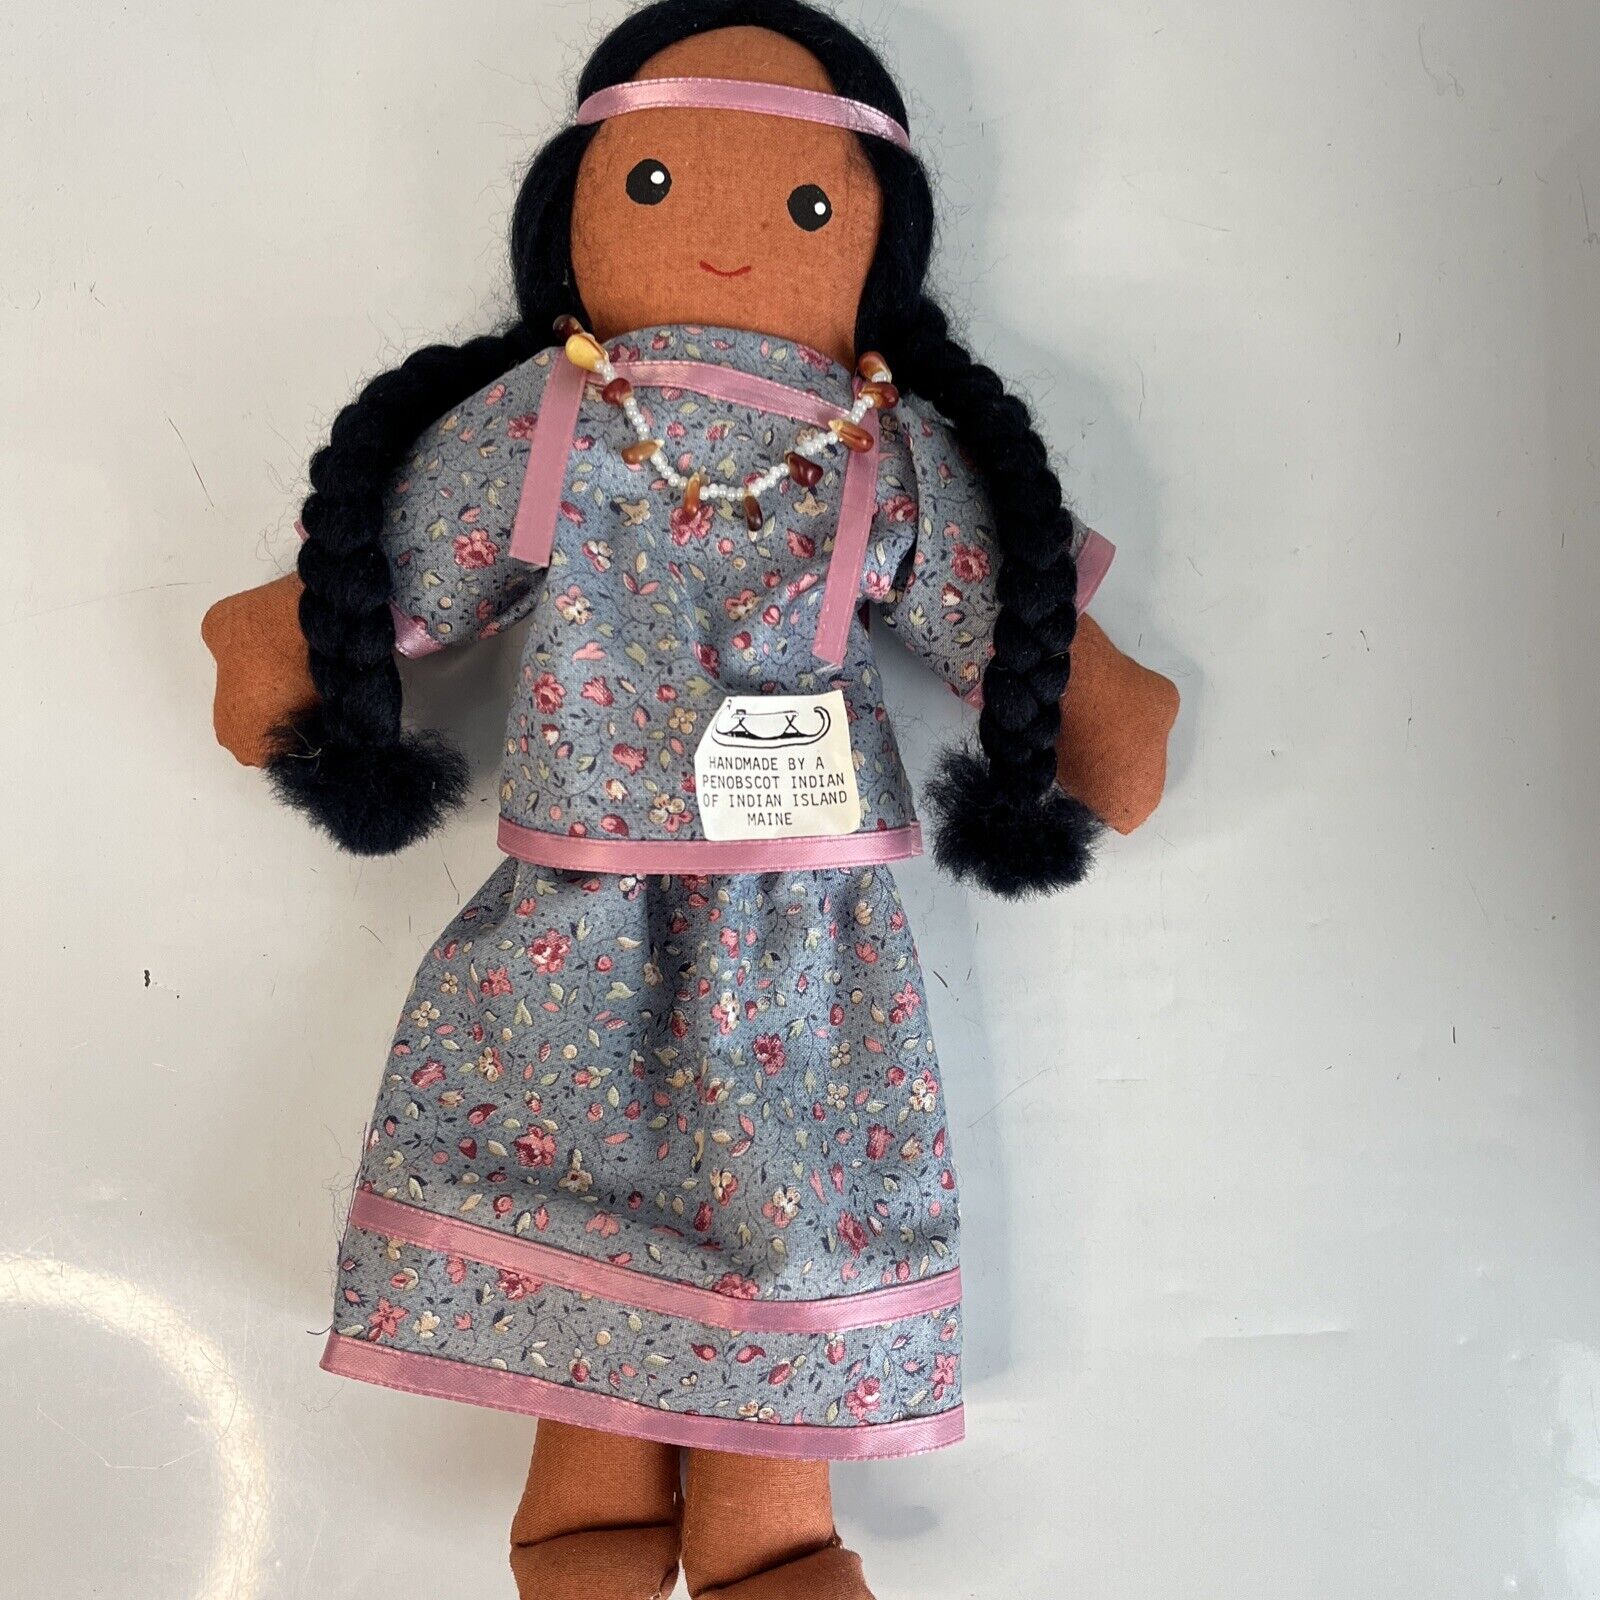 Penobscot Indian Cloth Doll Handmade Maine Native American 12 Inch Vintage